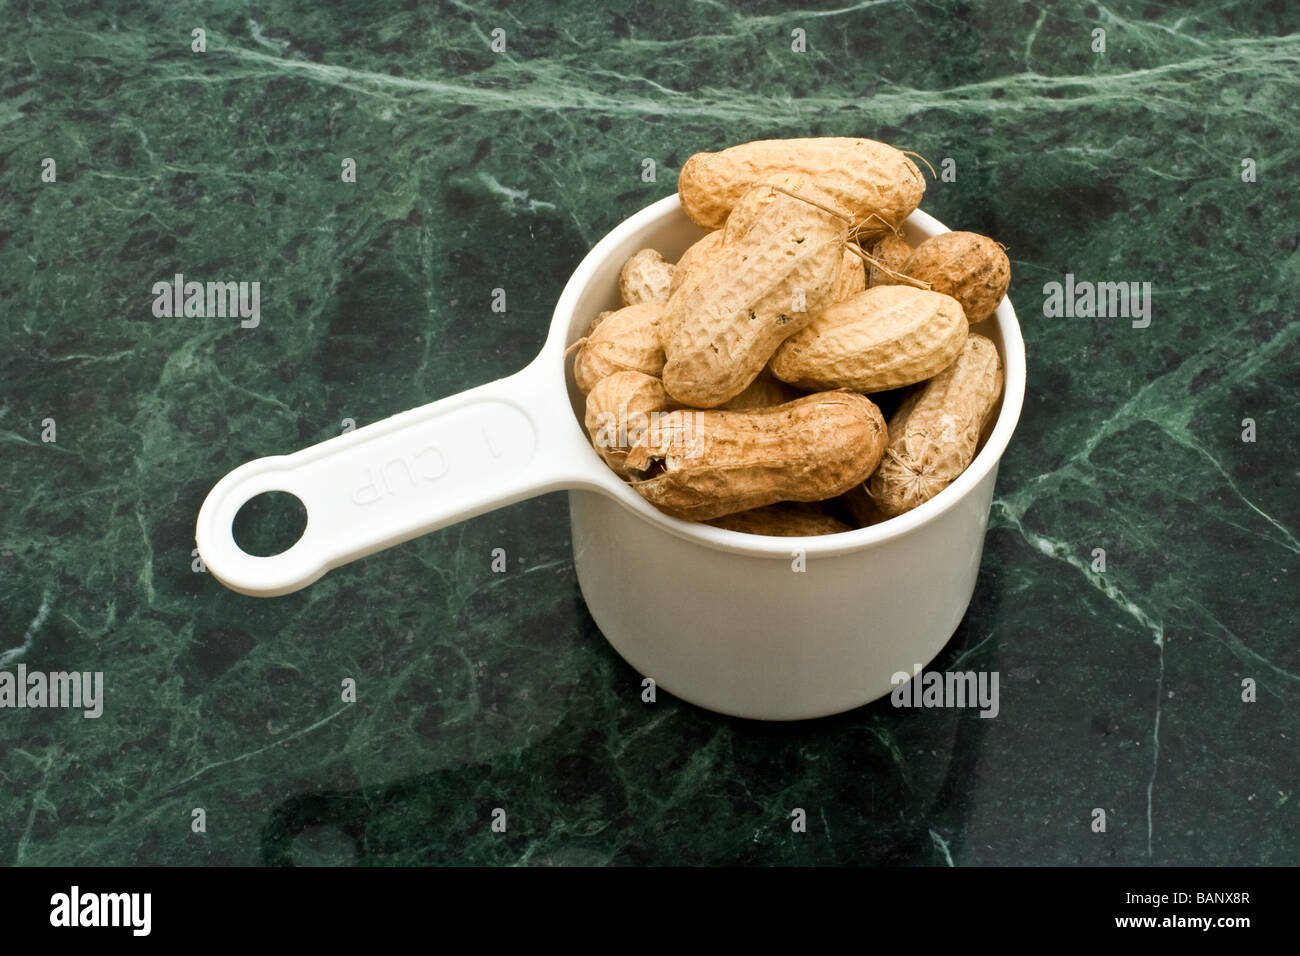 Single measuring cup filled with unshelled peanuts Stock Photo